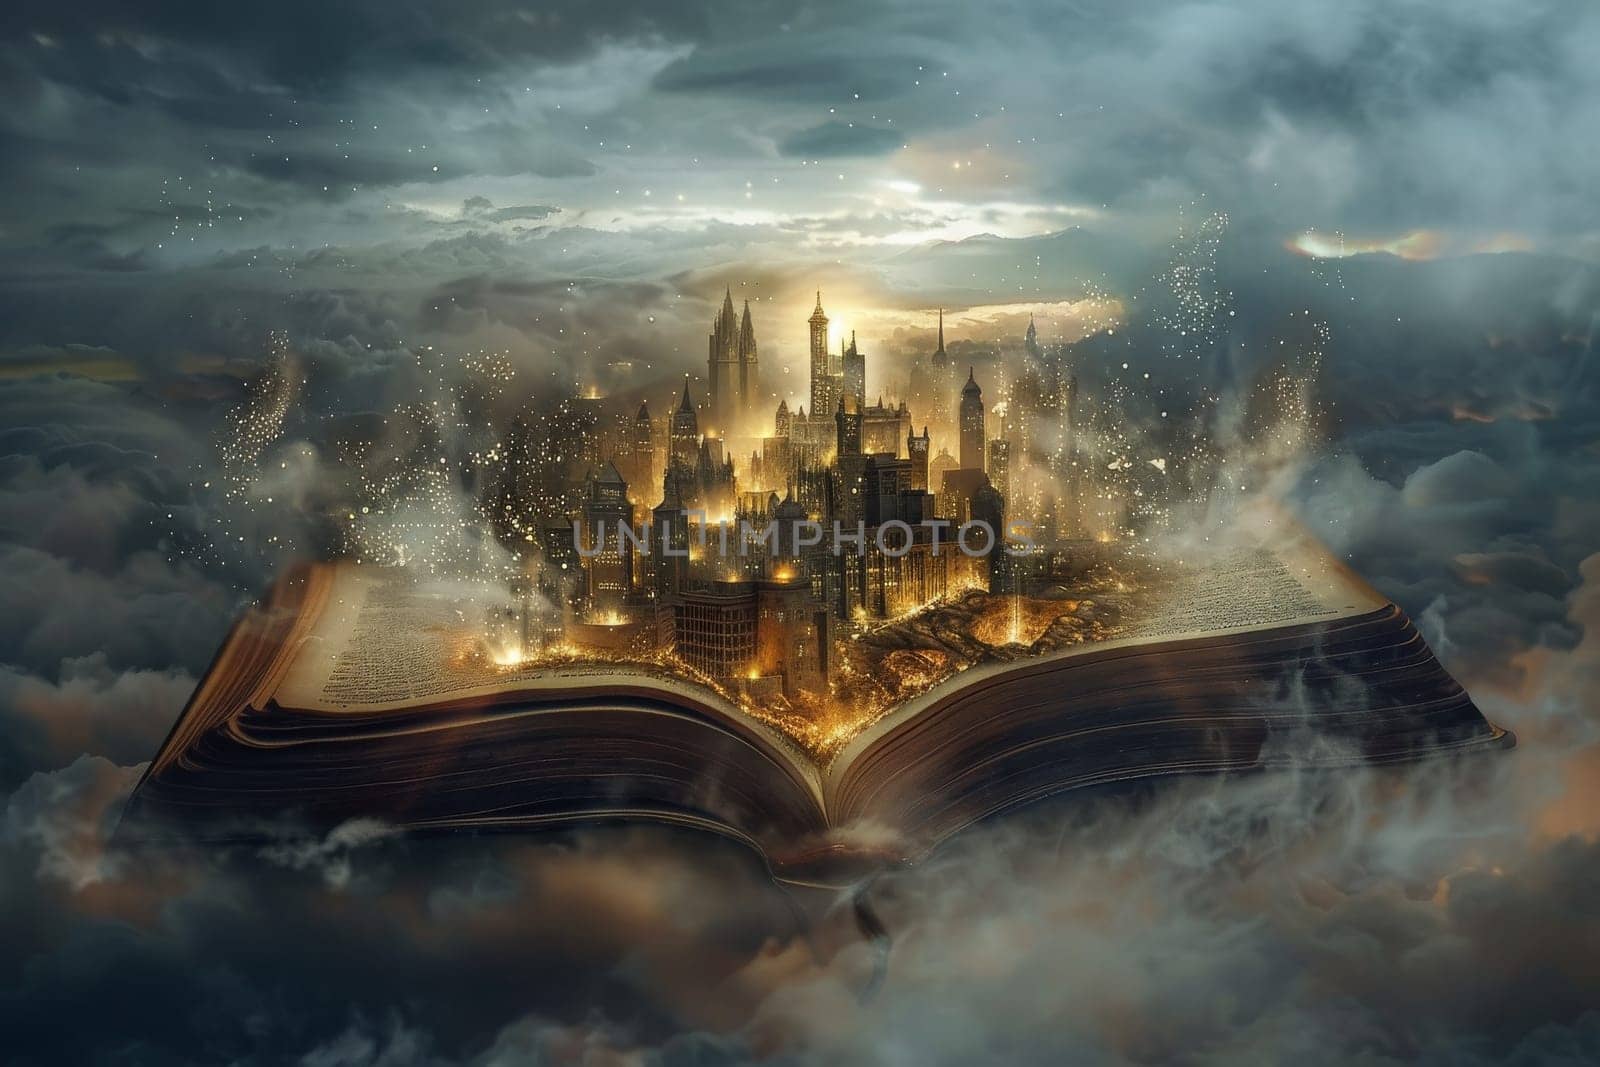 A city is shown in the middle of a book, with a large open book on top of it. The city is illuminated with lights, giving it a warm and inviting atmosphere. The scene is reminiscent of a fantasy world